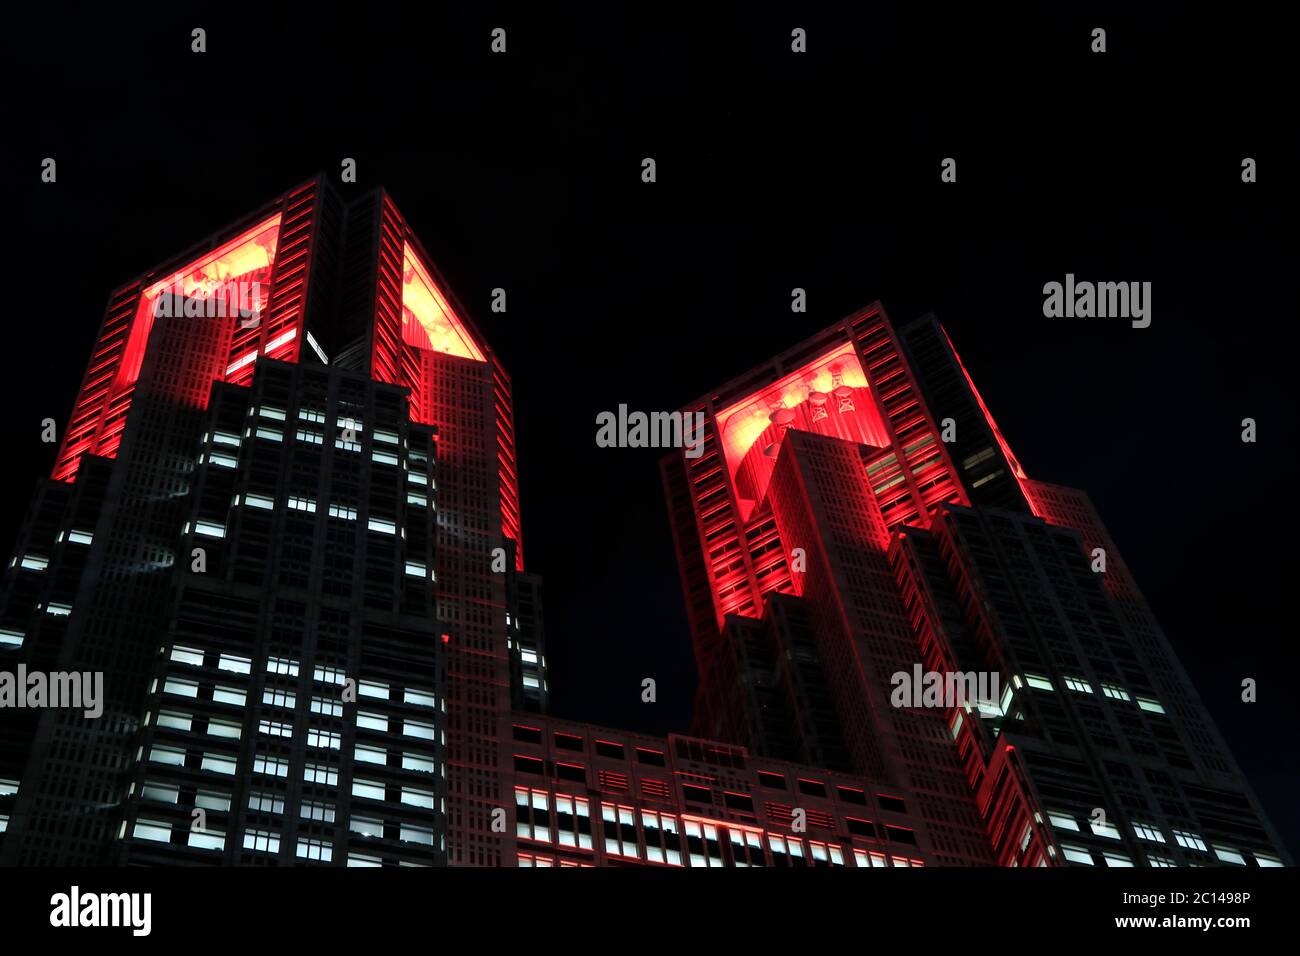 Tokyo metropolitan government building is lit up in red signifying “Tokyo alert” warning an additional caution against COVID-19 infections on 10 June. Stock Photo